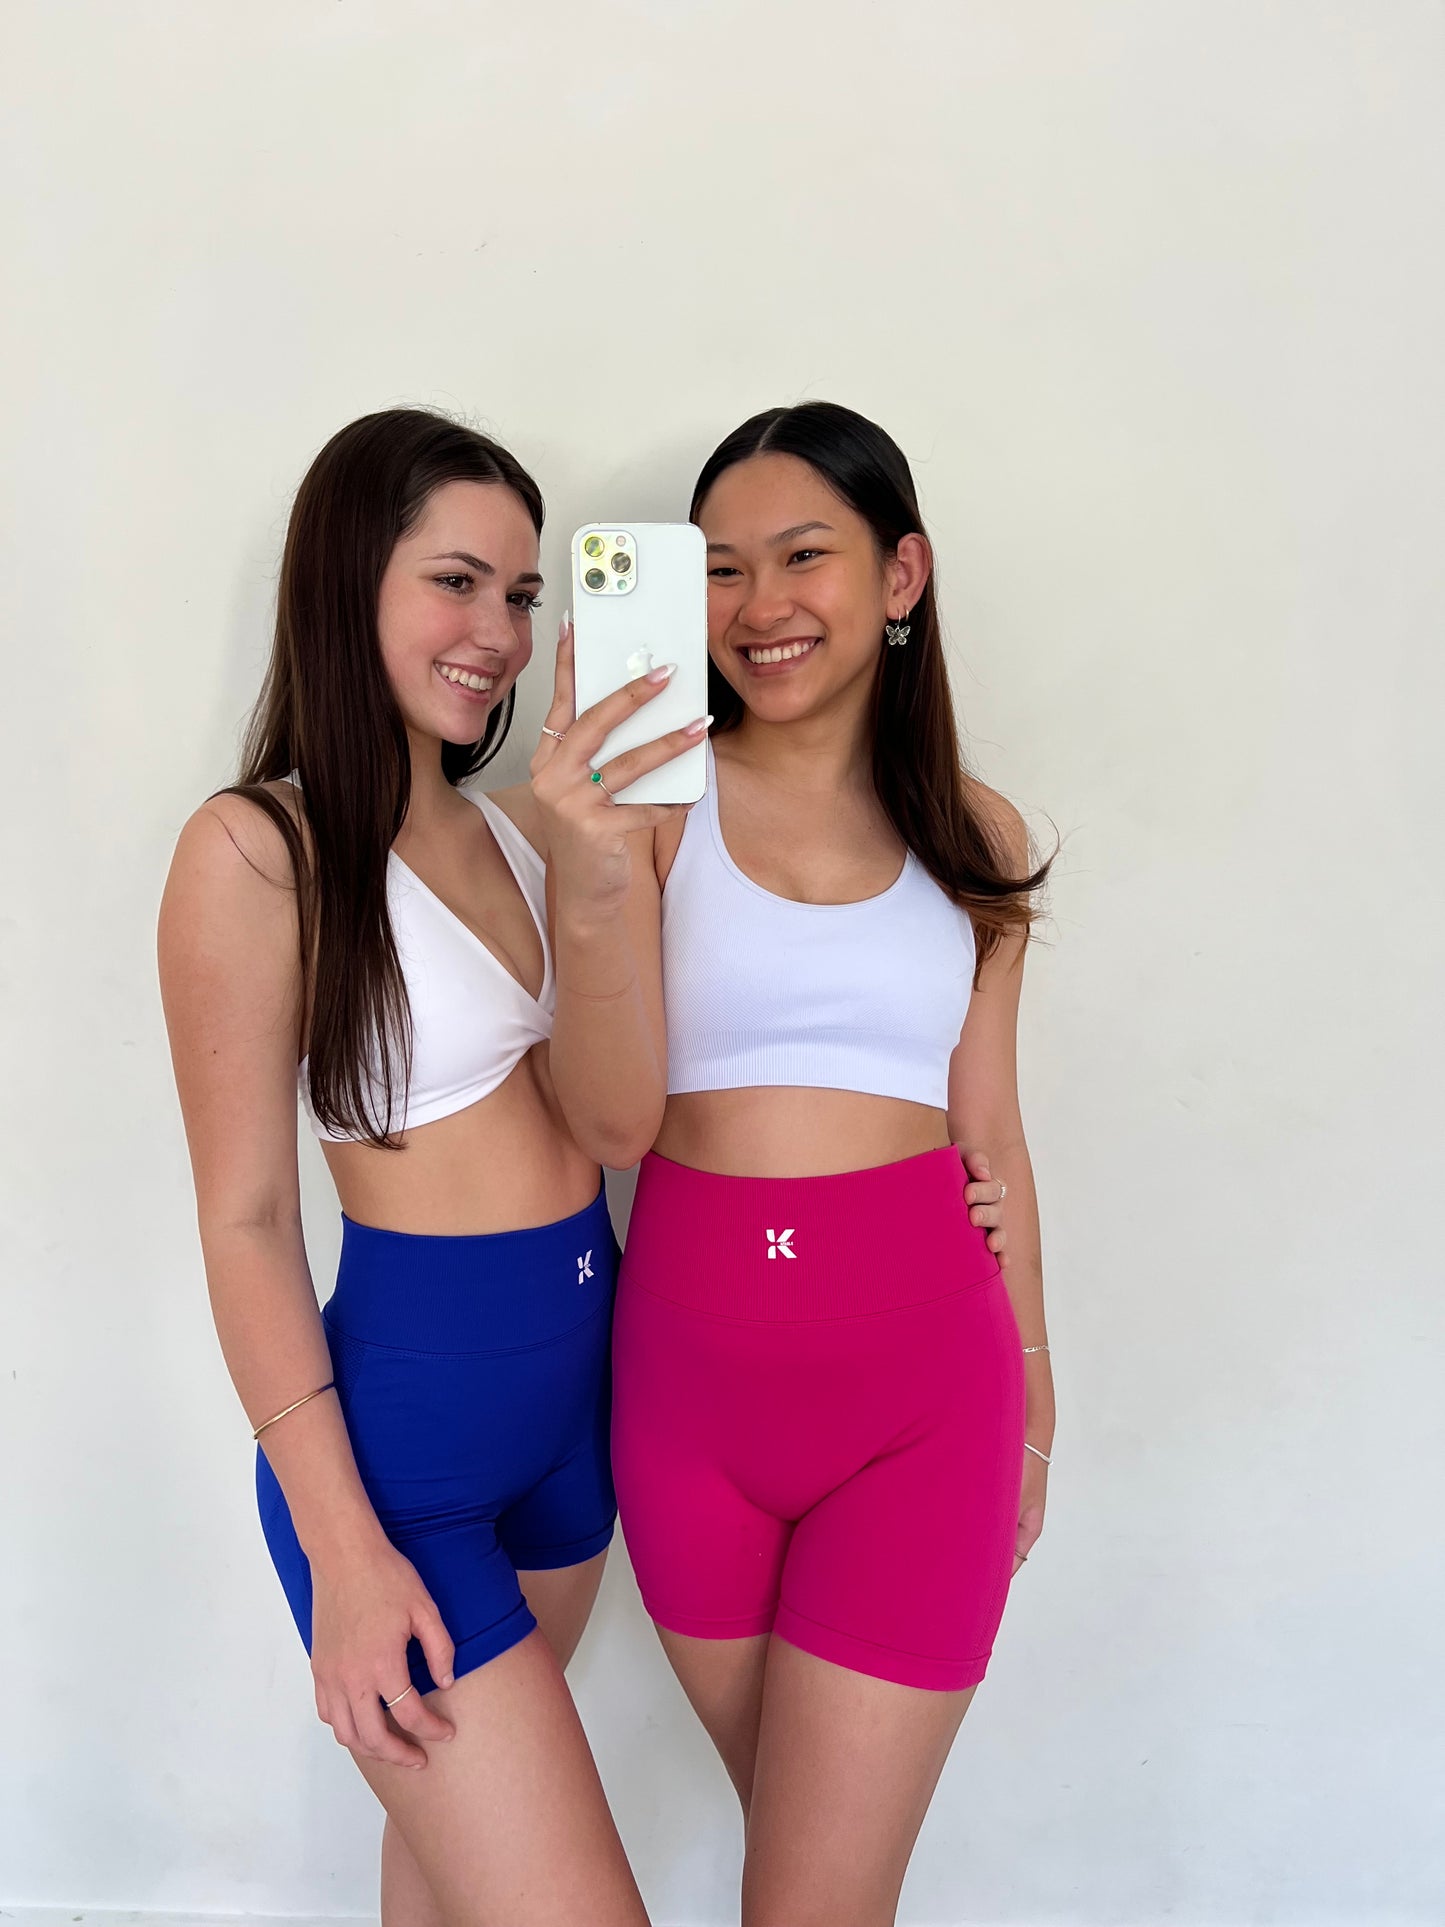 Stylish Pink Super Set Scrunch Bum Shorts made from 87% Nylon and 13% Elastane for fashion and functionality. These shorts feature a flattering scrunch bum design. Modeled in size S by a person who is 165cm tall